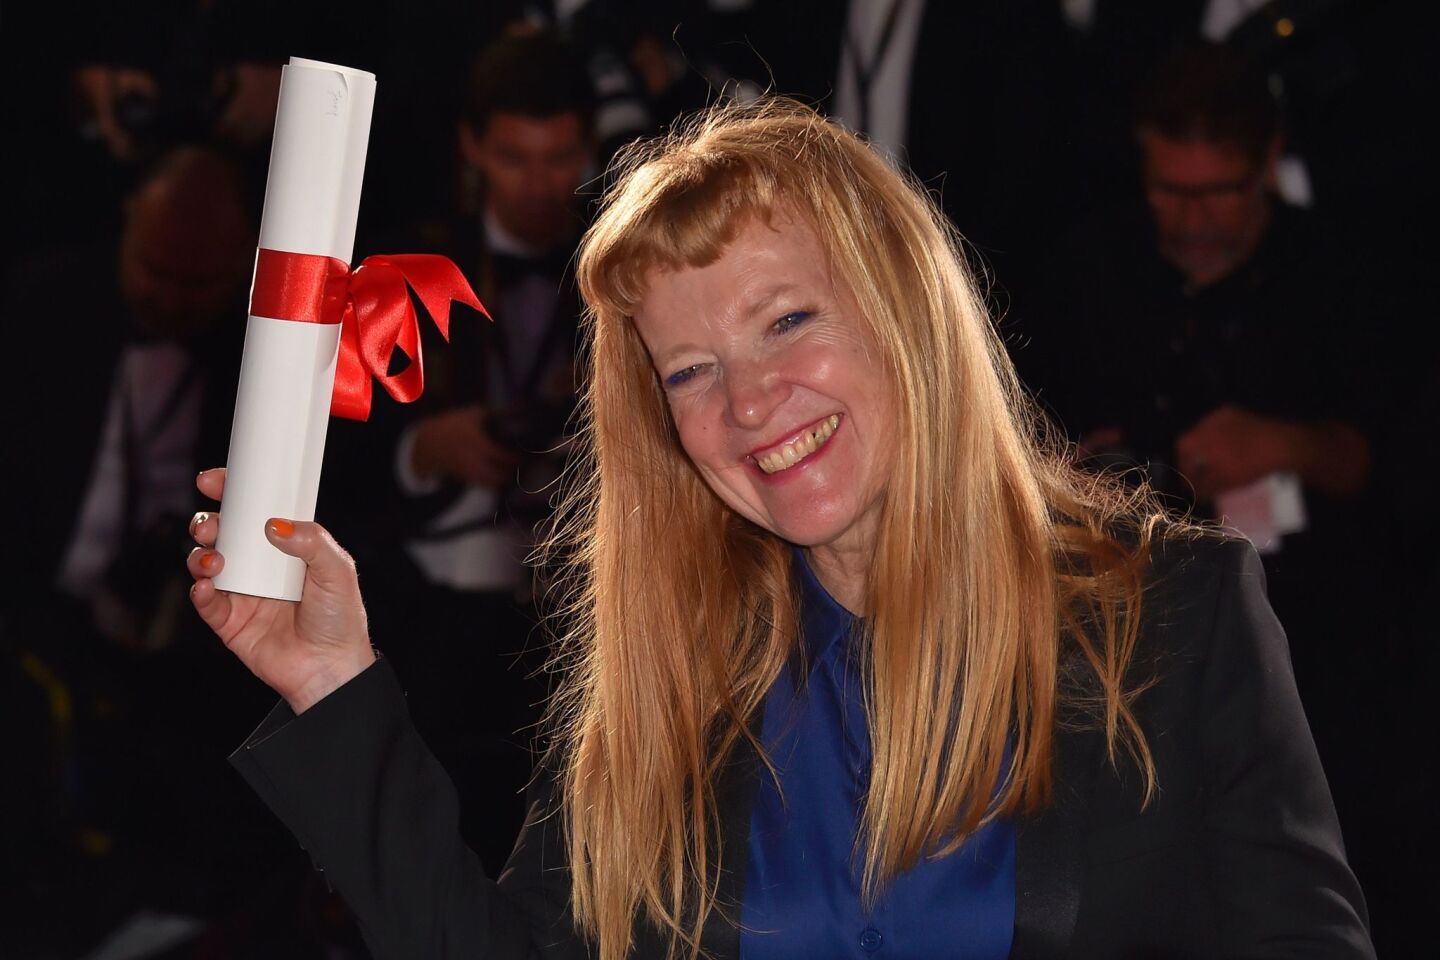 British director Andrea Arnold poses with her trophy during a photo call after she was awarded with the Jury Prize for the film "American Honey" at 69th Cannes Film Festival.